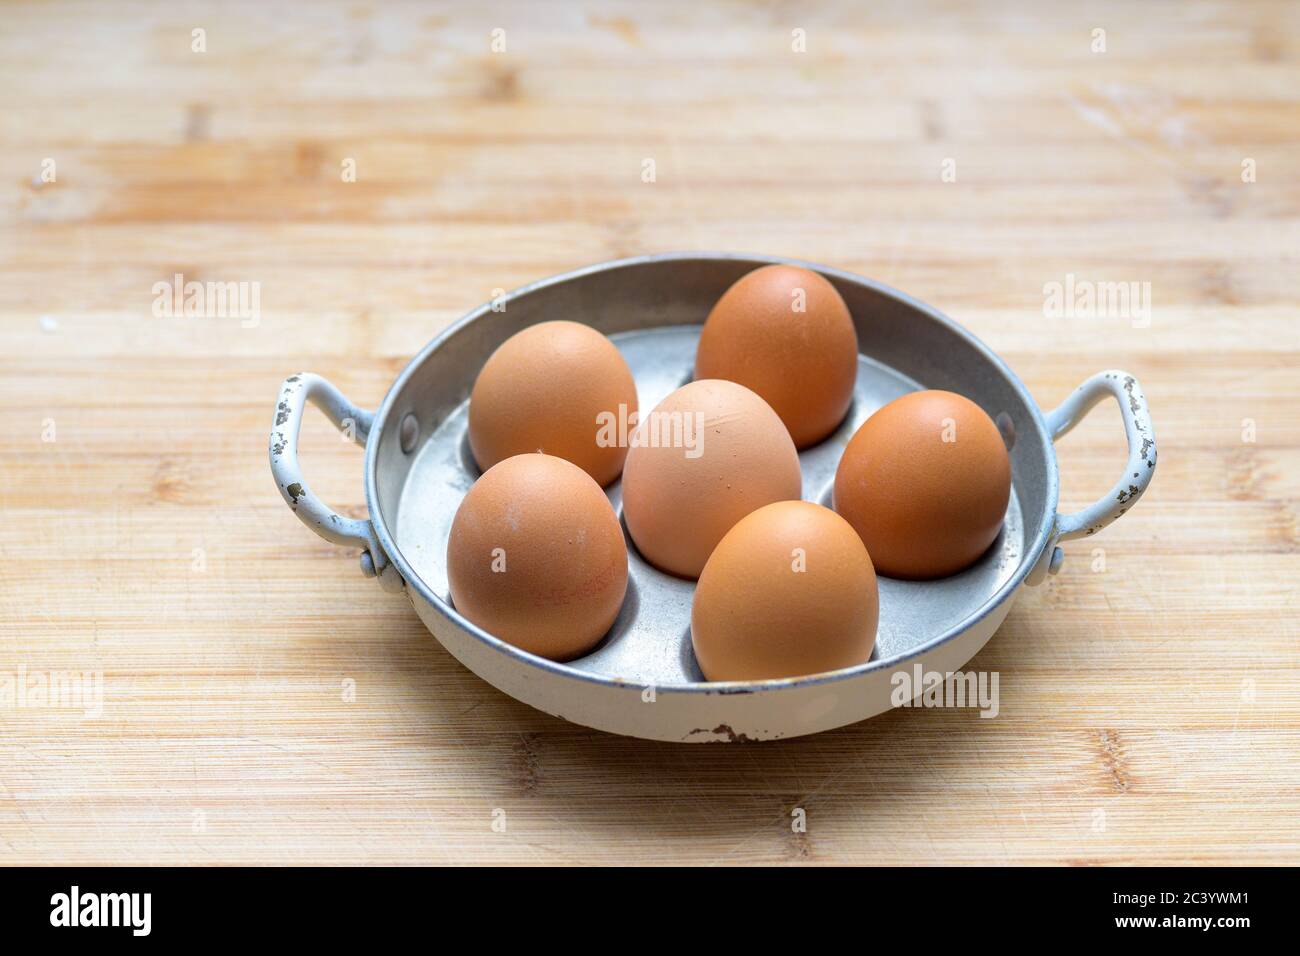 Six fresh brown hens eggs in a metal pot or egg coddler viewed from side on a wooden table with copyspace placed in the centre Stock Photo